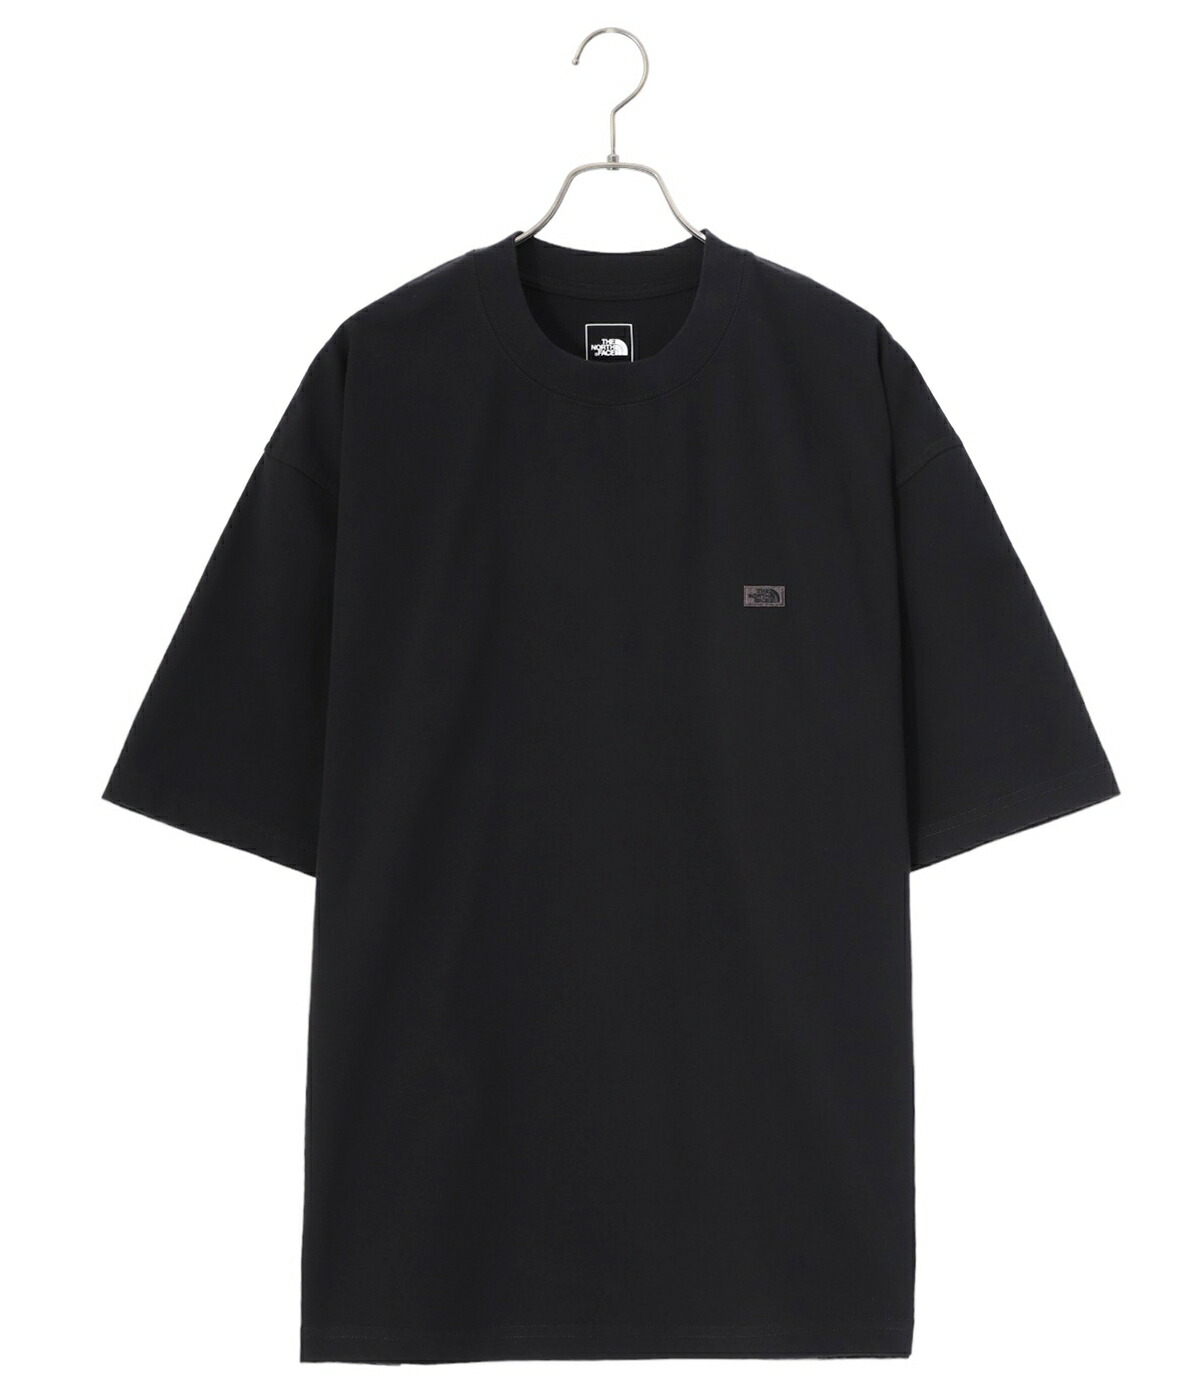 THE NORTH FACE / ザ ノースフェイス ： S/S Rock Steady Tee N...